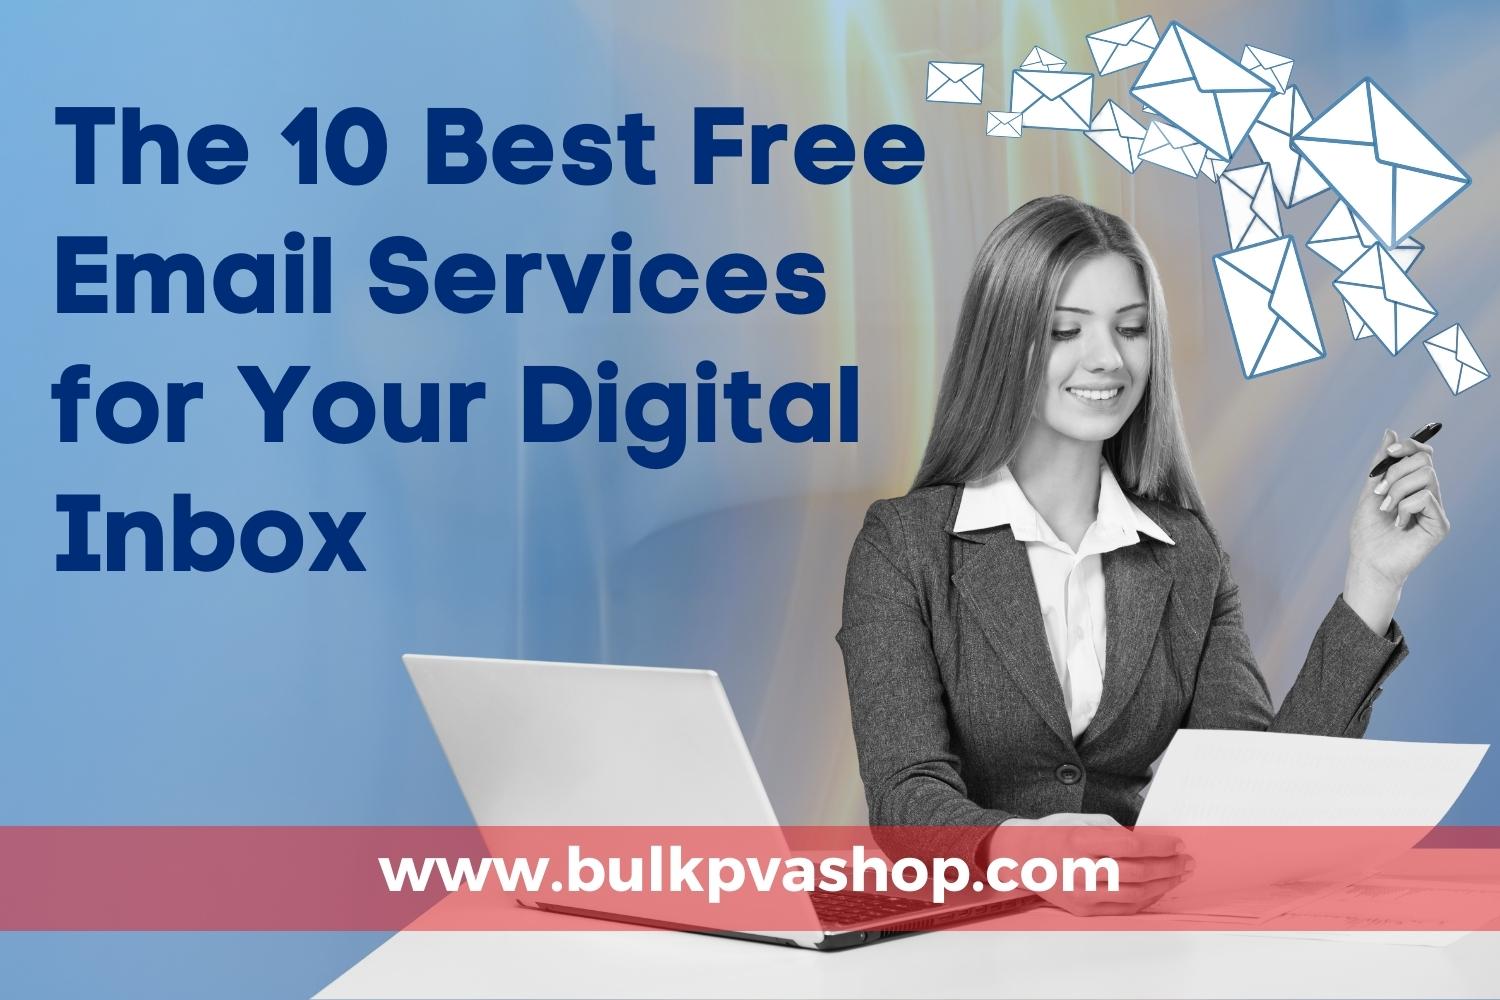 The 10 Best Free Email Services for Your Digital Inbox